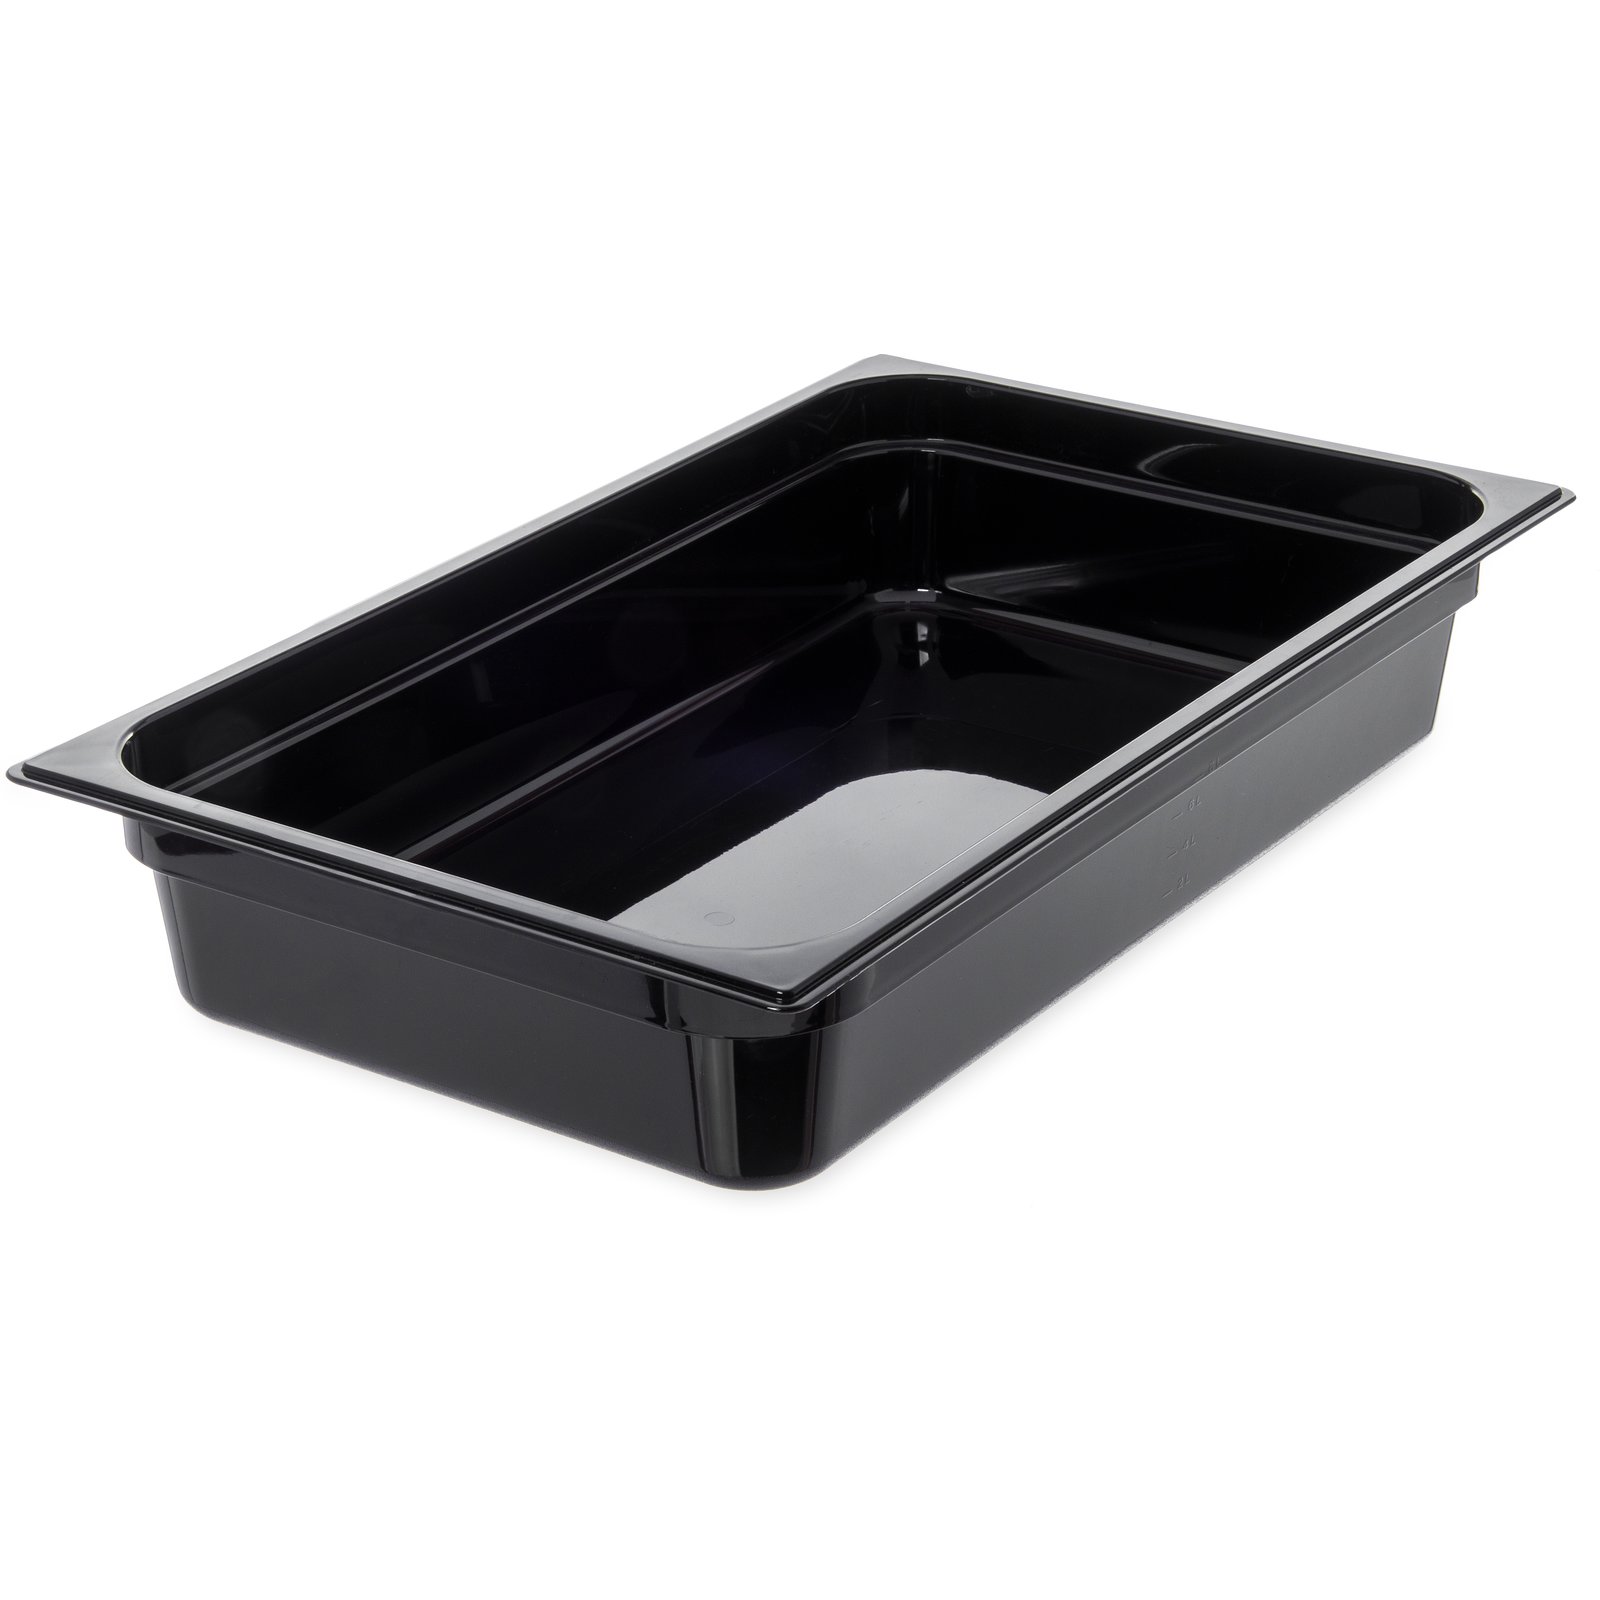 Saxby Omega Mains Black Abs Plastic & Frosted Polycarbonate